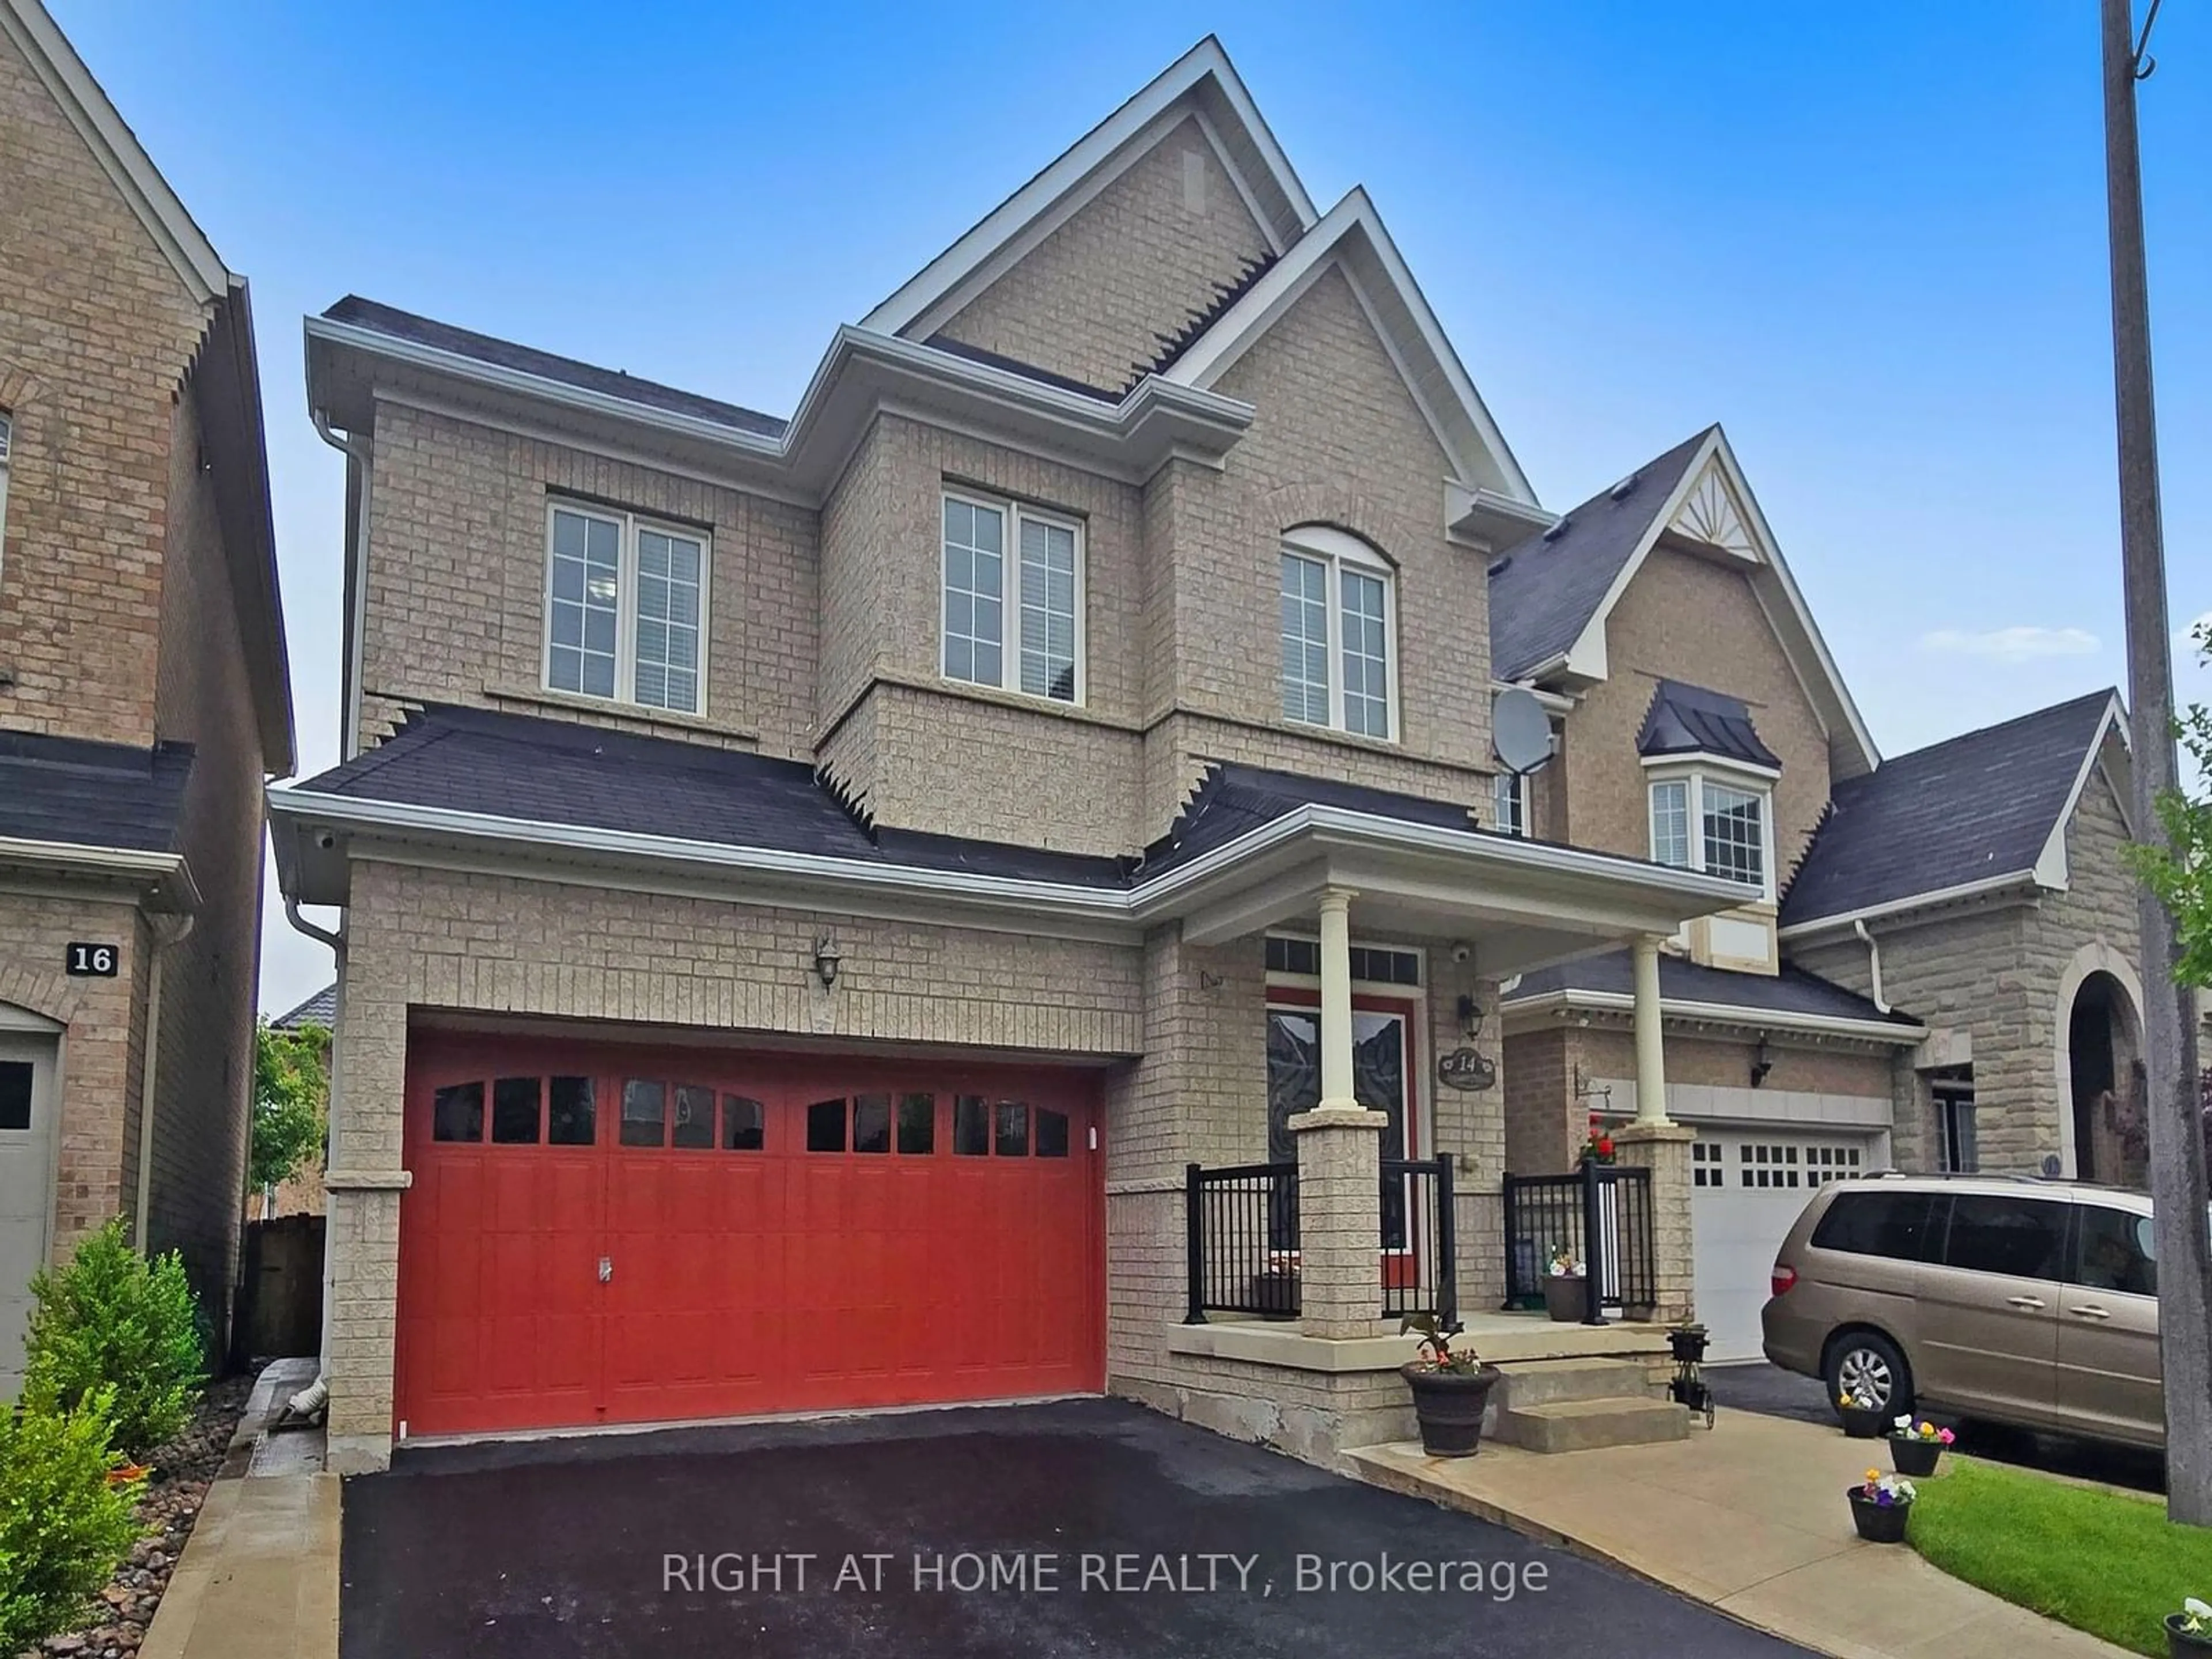 Home with brick exterior material for 14 Appleaire Cres, Brampton Ontario L6R 0Y4